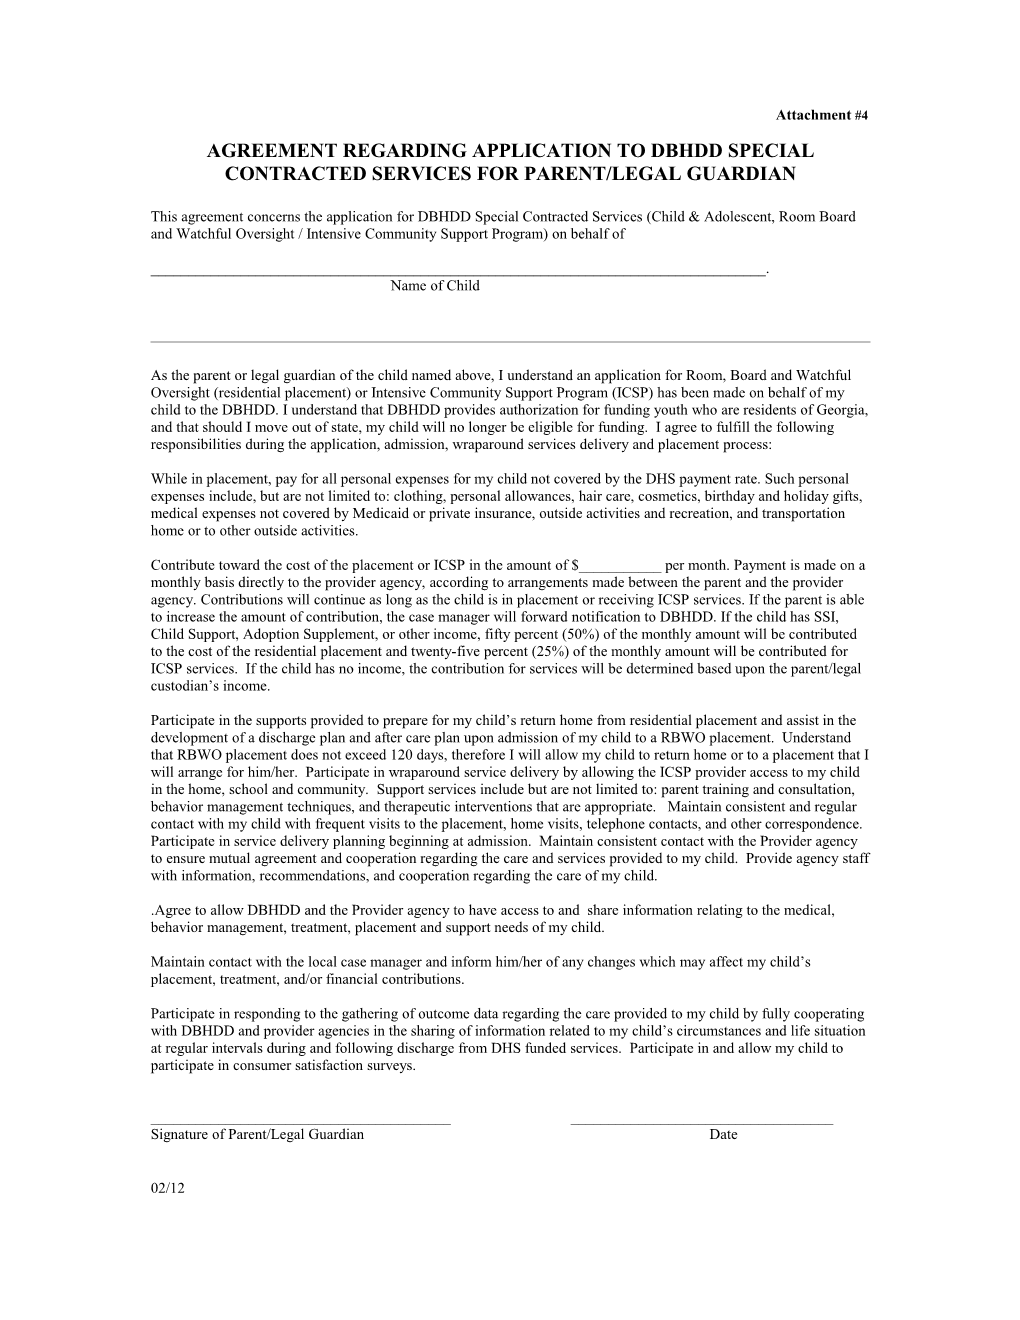 Agreement Regarding Application to Dbhdd Special Contracted Services for Parent/Legal Guardian